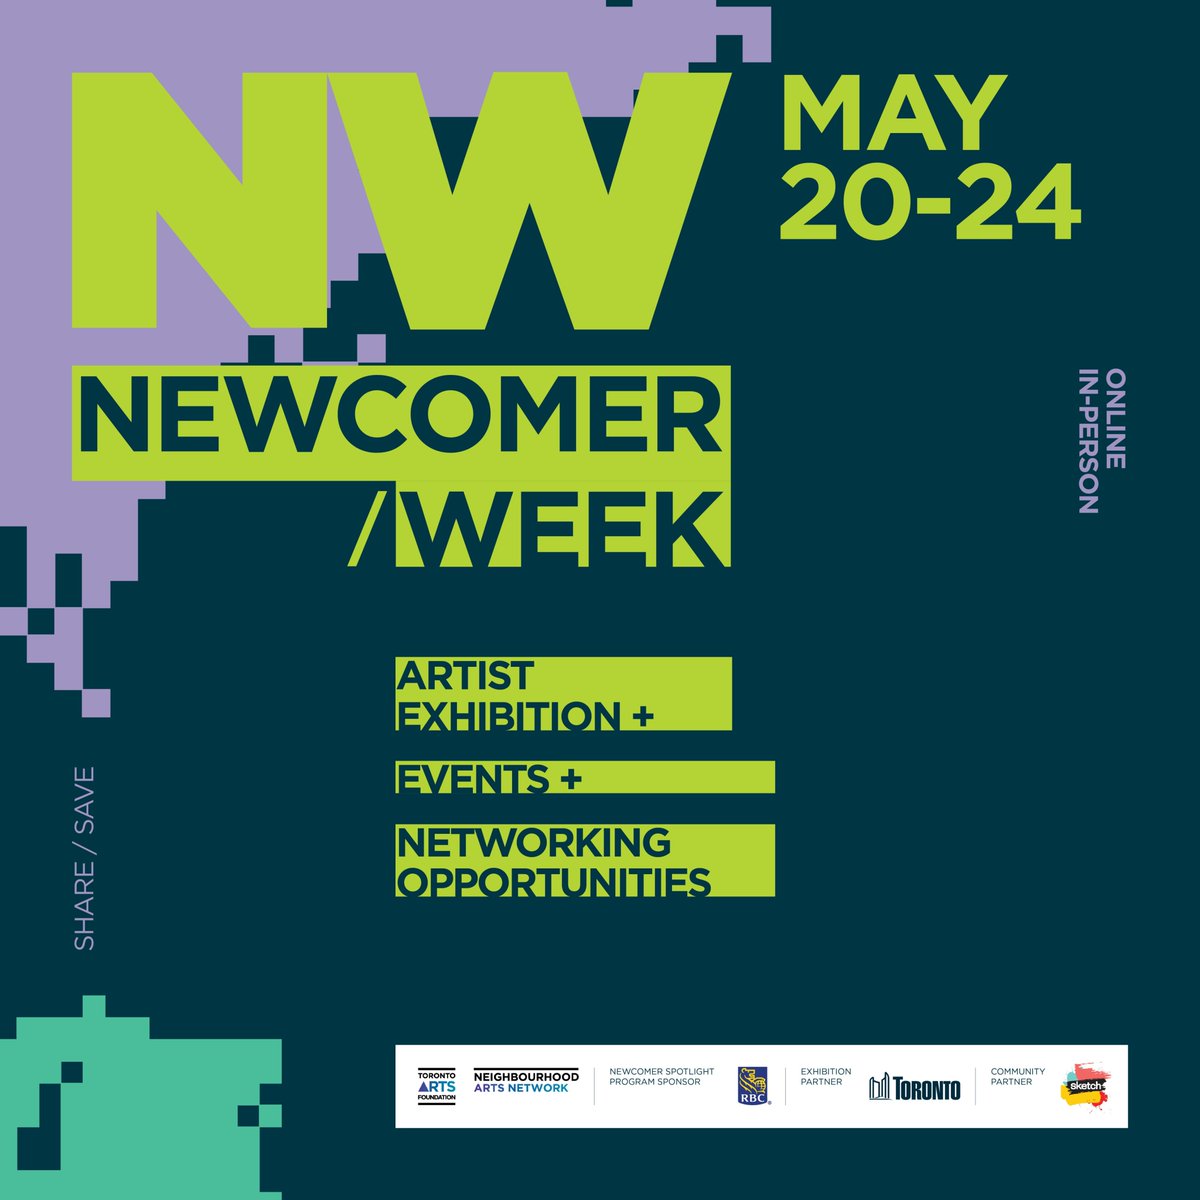 We are thrilled to unveil our Newcomer Week 2024 programming! Through this week of celebration, arts activations and several other exciting activities, we welcome newcomers to Toronto as they begin a new life in our city. Learn more: bit.ly/3K55R3m